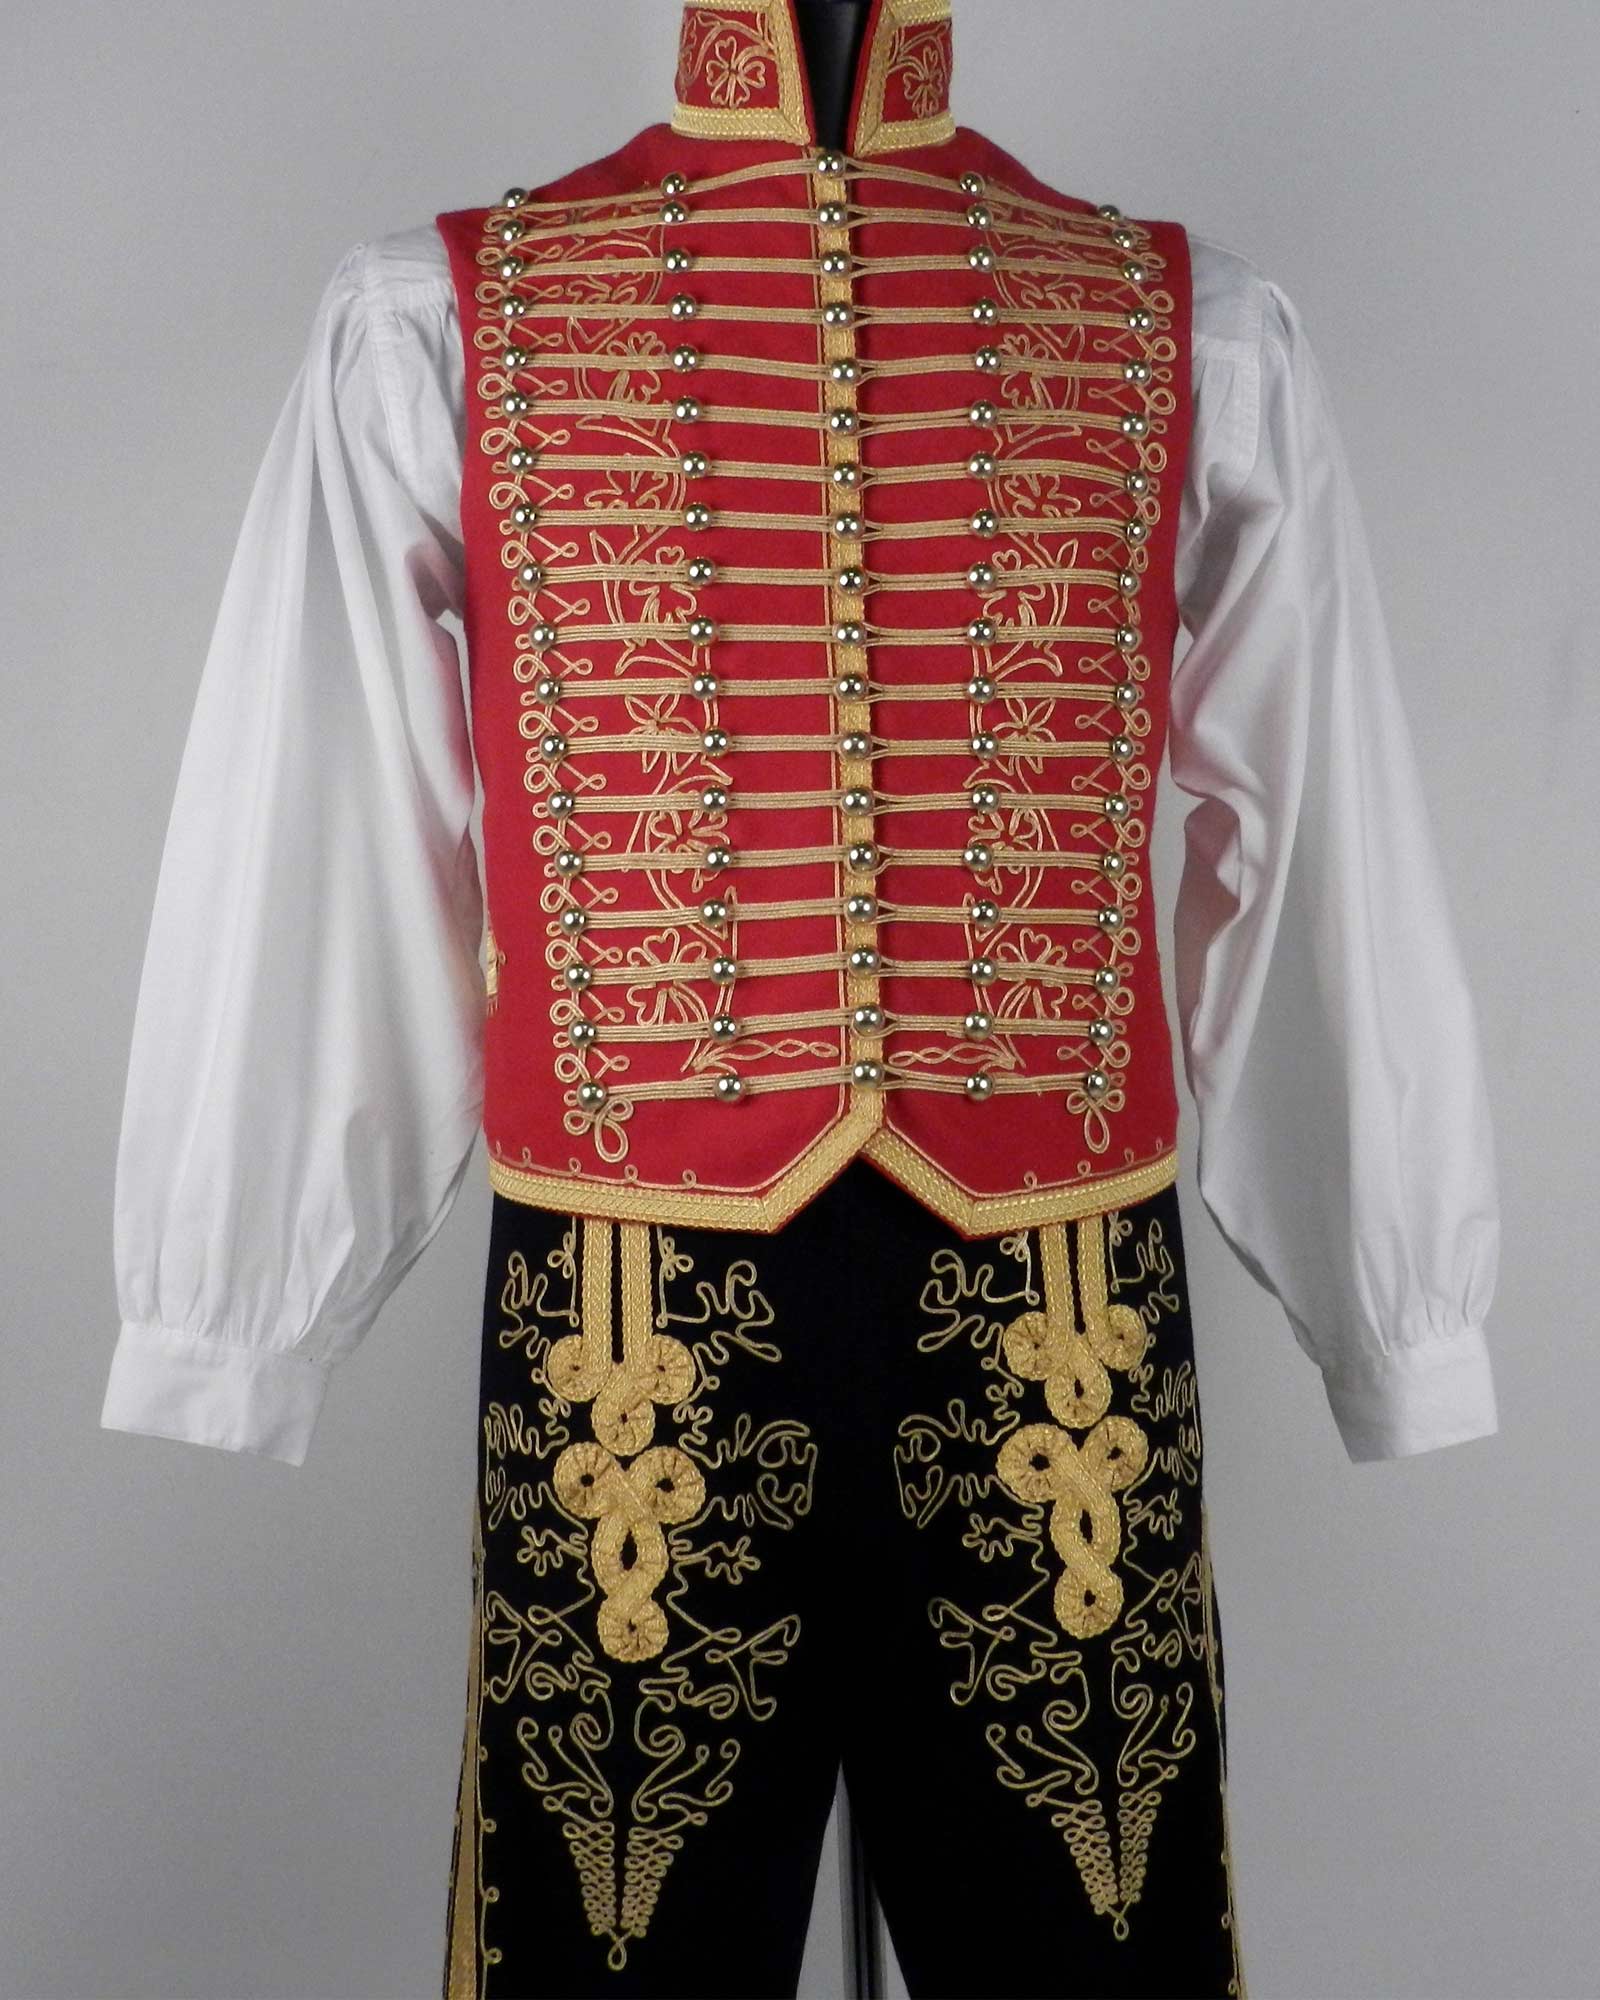 Elaborate Adornments on Cavalry Senior Officer Trousers